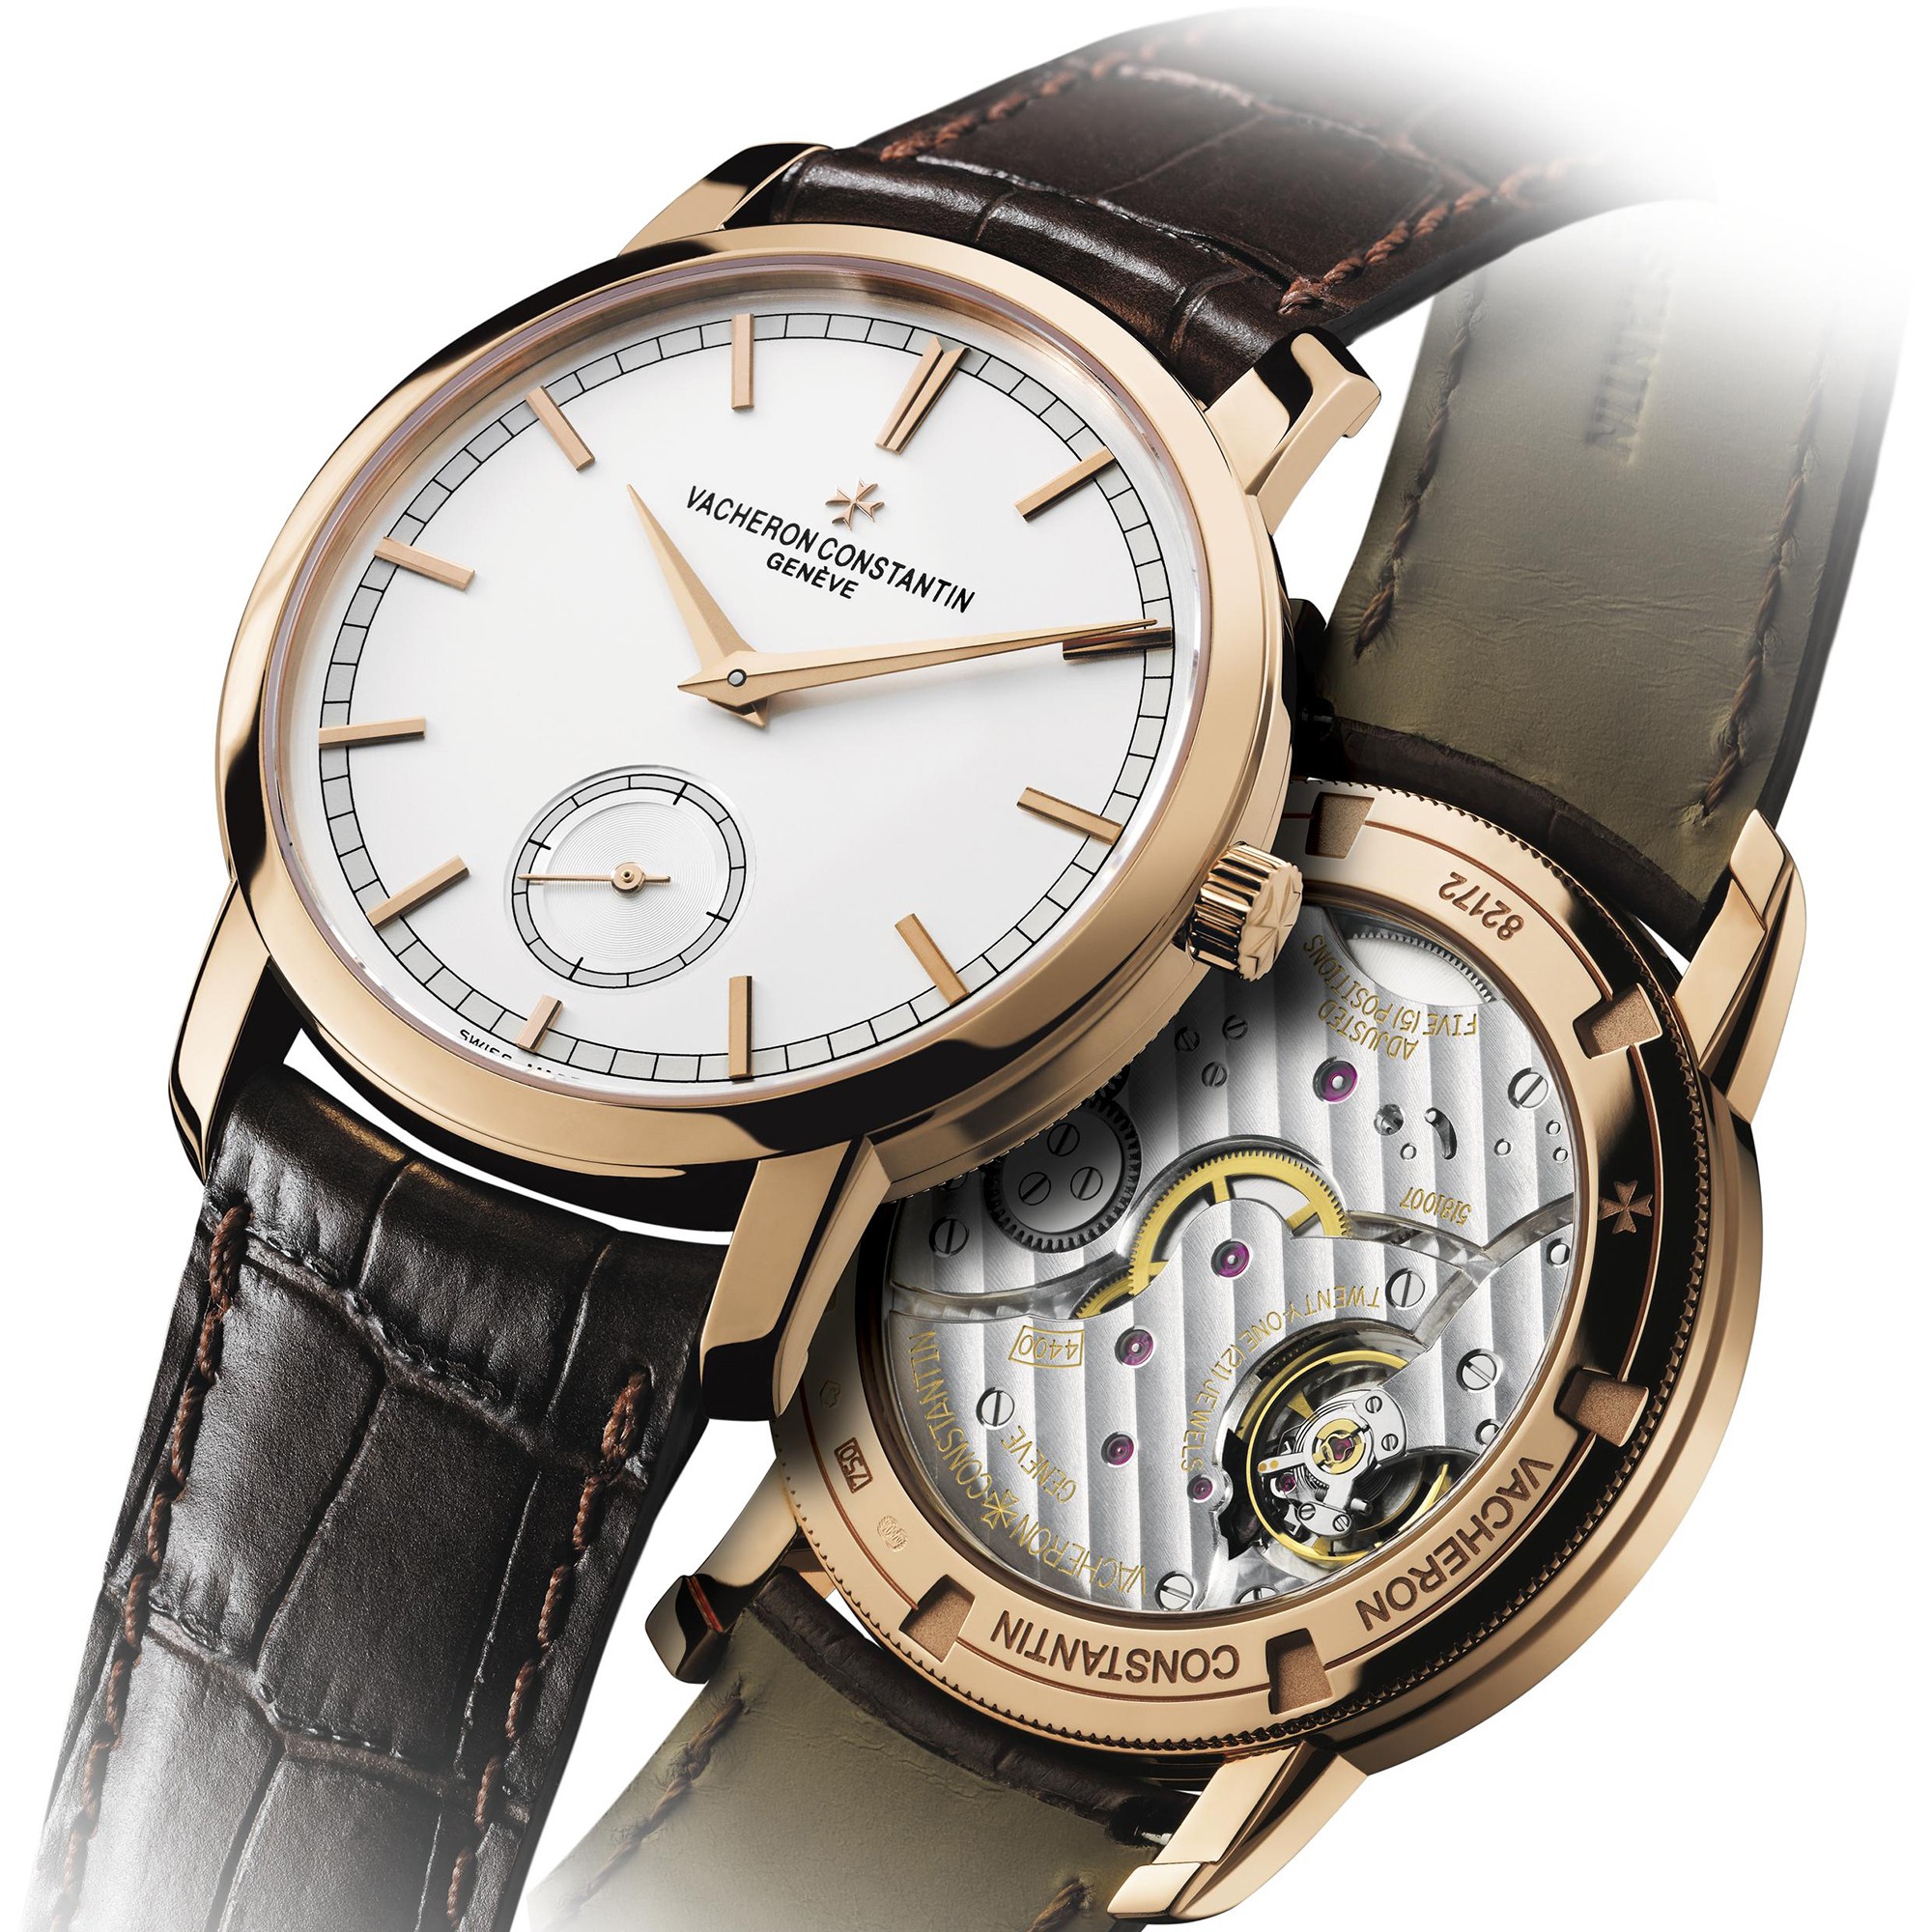 Vacheron Constantin Traditionnelle Manual Winding Mens Watch 82172/000R ...